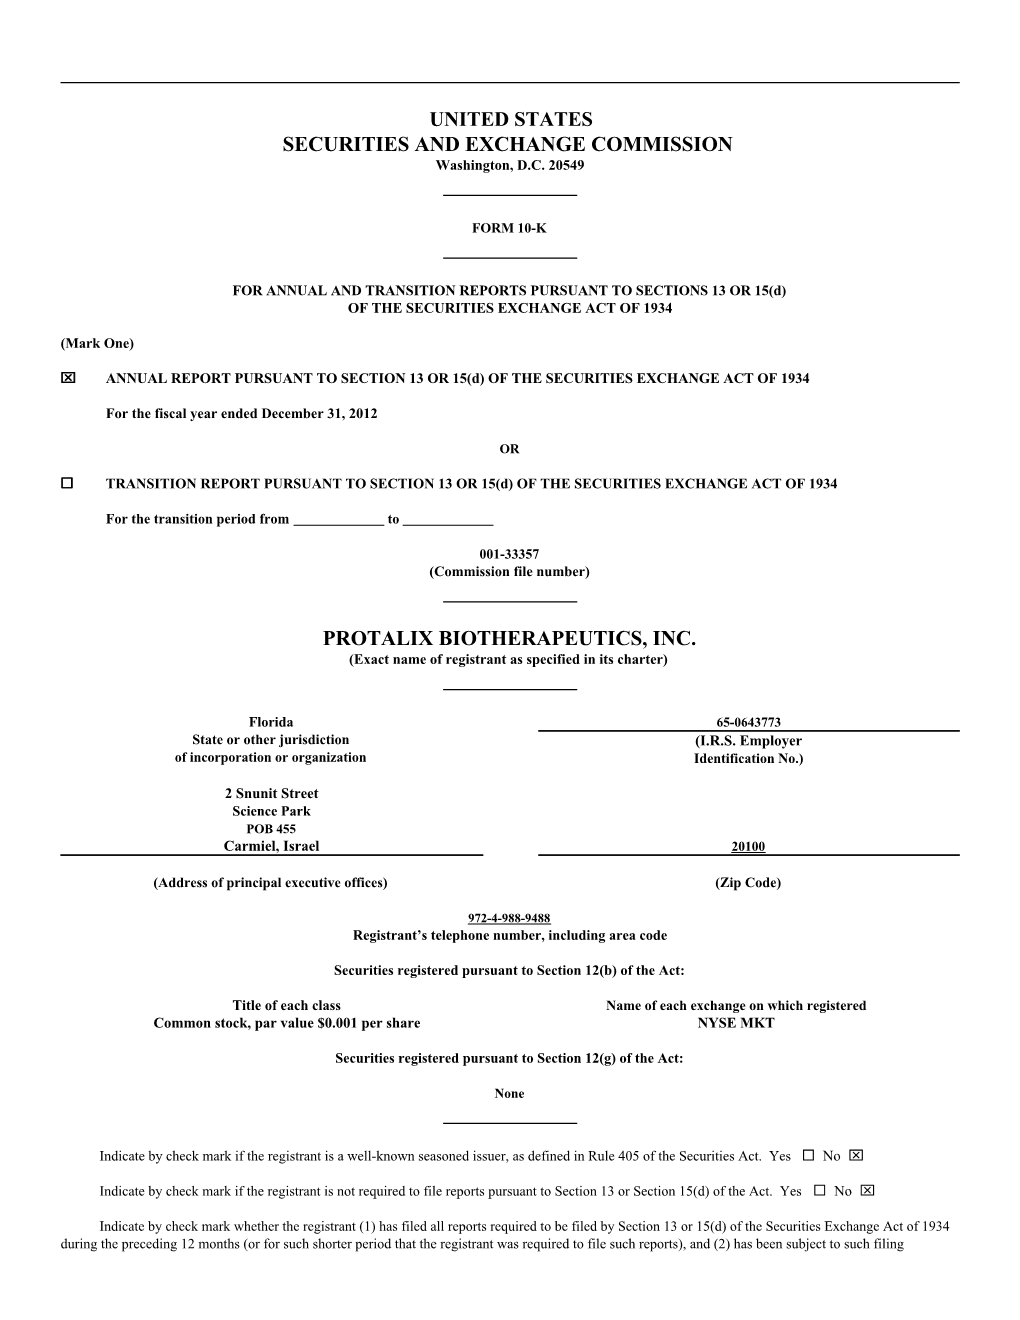 PROTALIX BIOTHERAPEUTICS, INC. (Exact Name of Registrant As Specified in Its Charter)